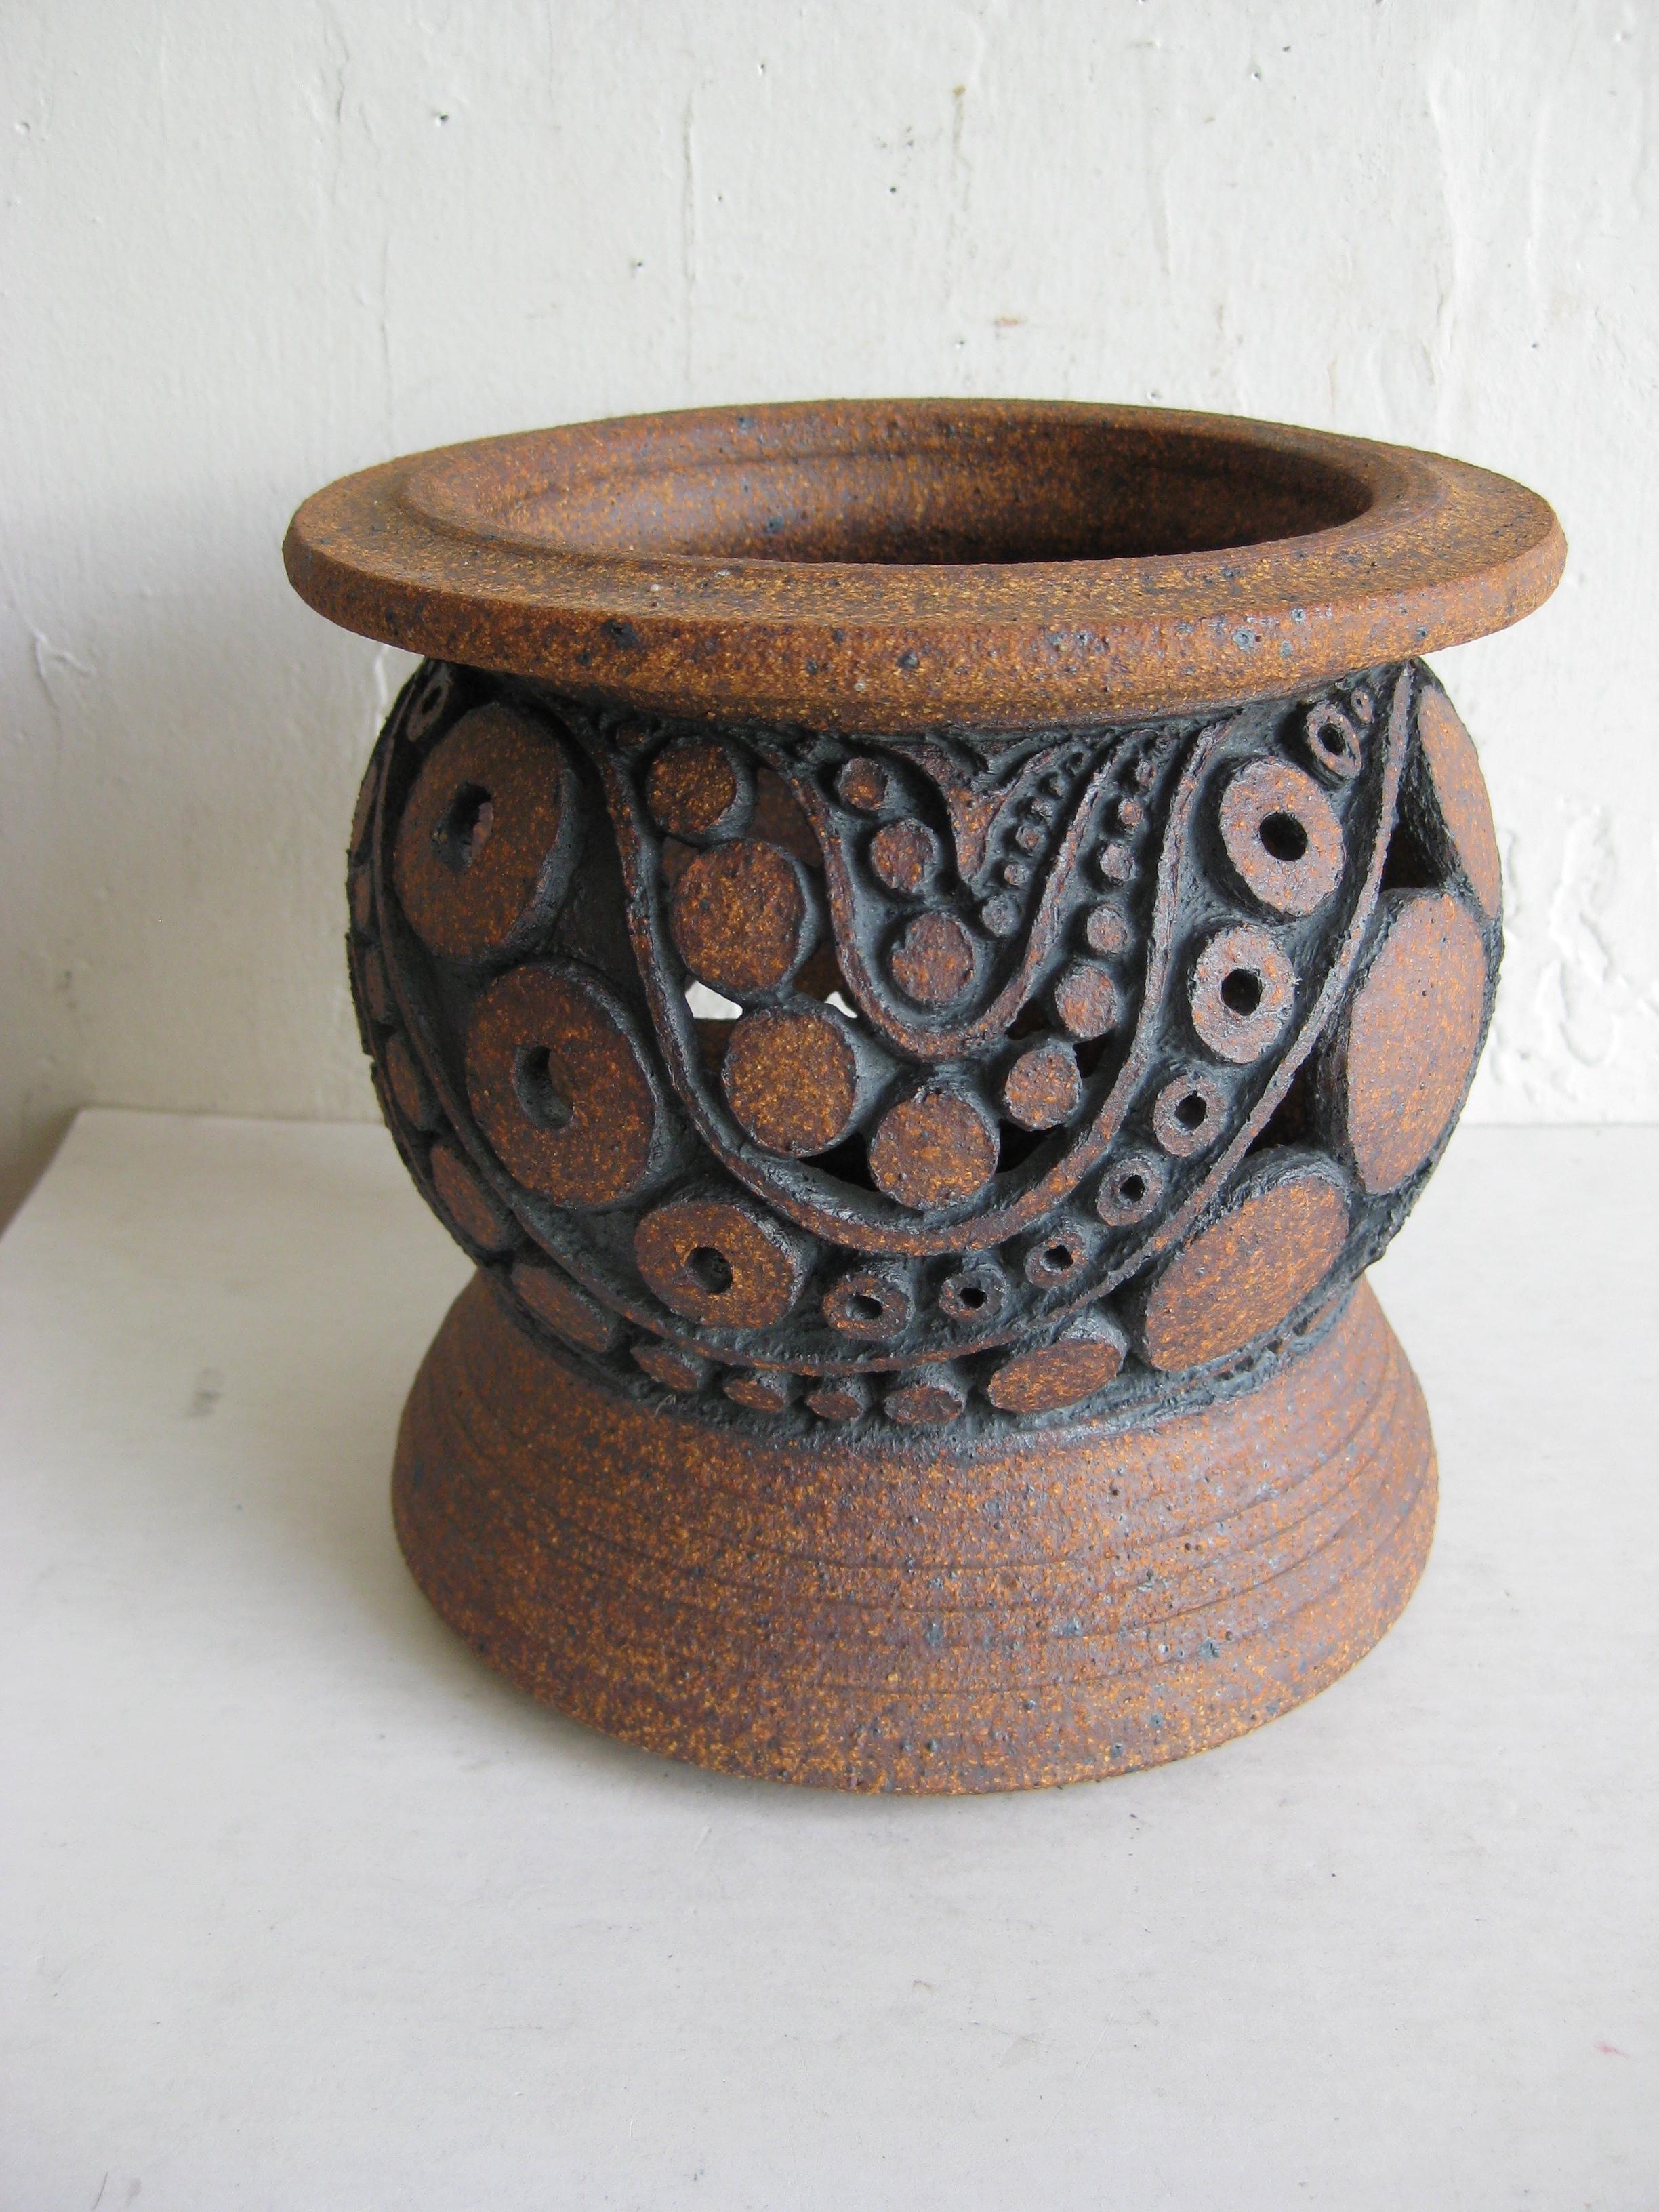 Stunning earthenware studio pottery vessel or vase or candleholder by San Diego artist, Wayne Chapman. Dates from the 1960s-1970s. Wonderful organic design. Signed on the bottom by the artist. Would work with dried flowers as a vase or with a candle